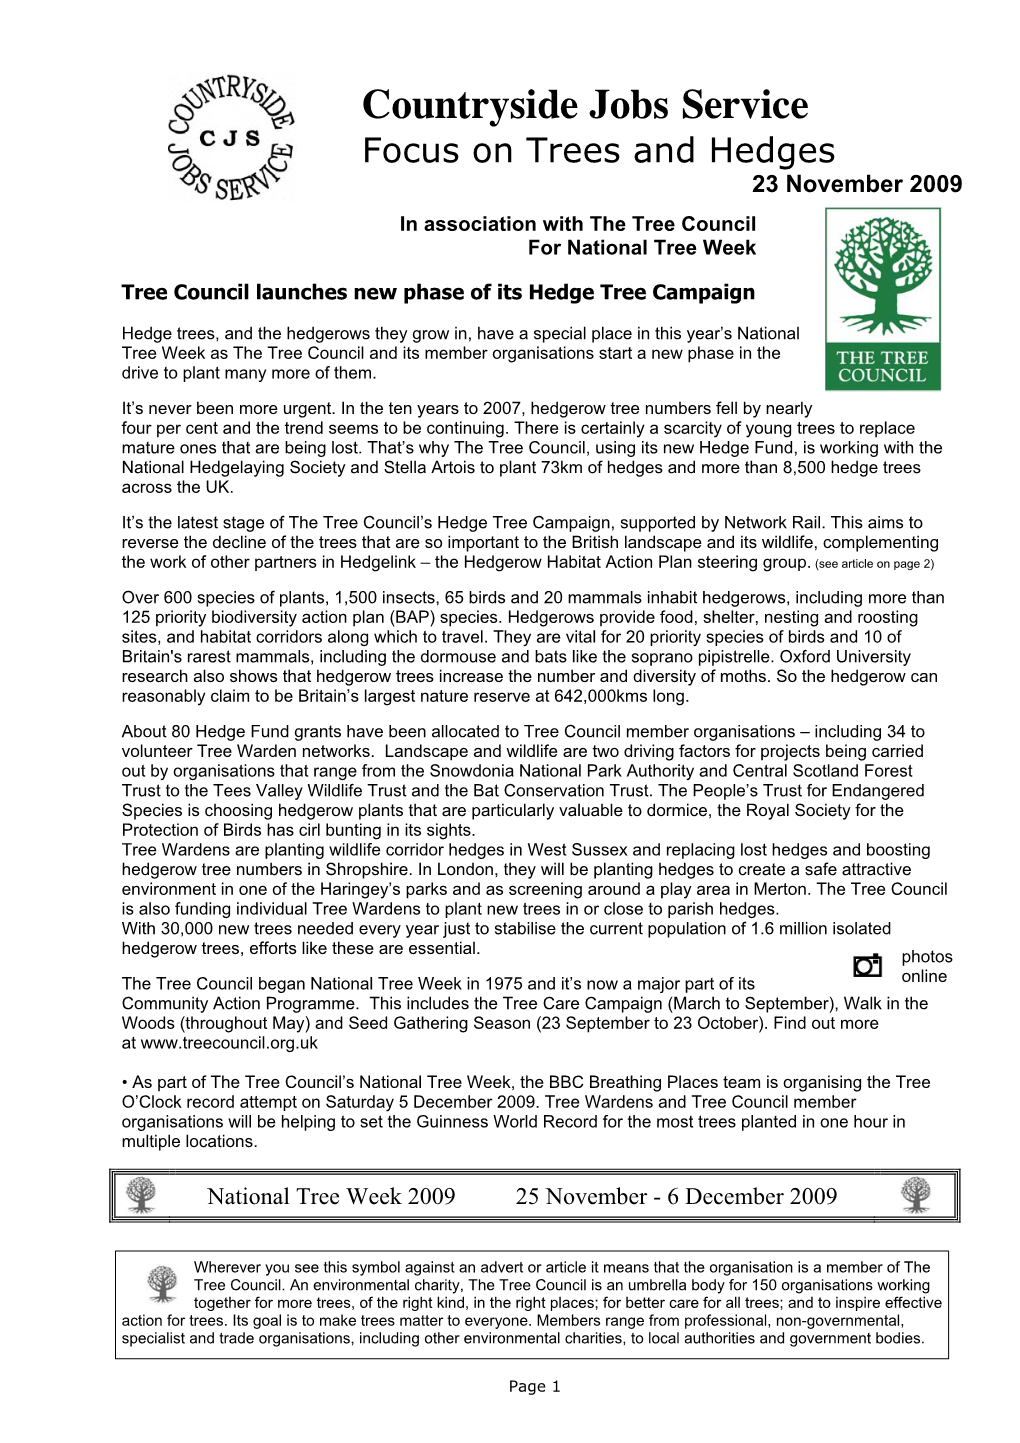 Countryside Jobs Service Focus on Trees and Hedges 23 November 2009